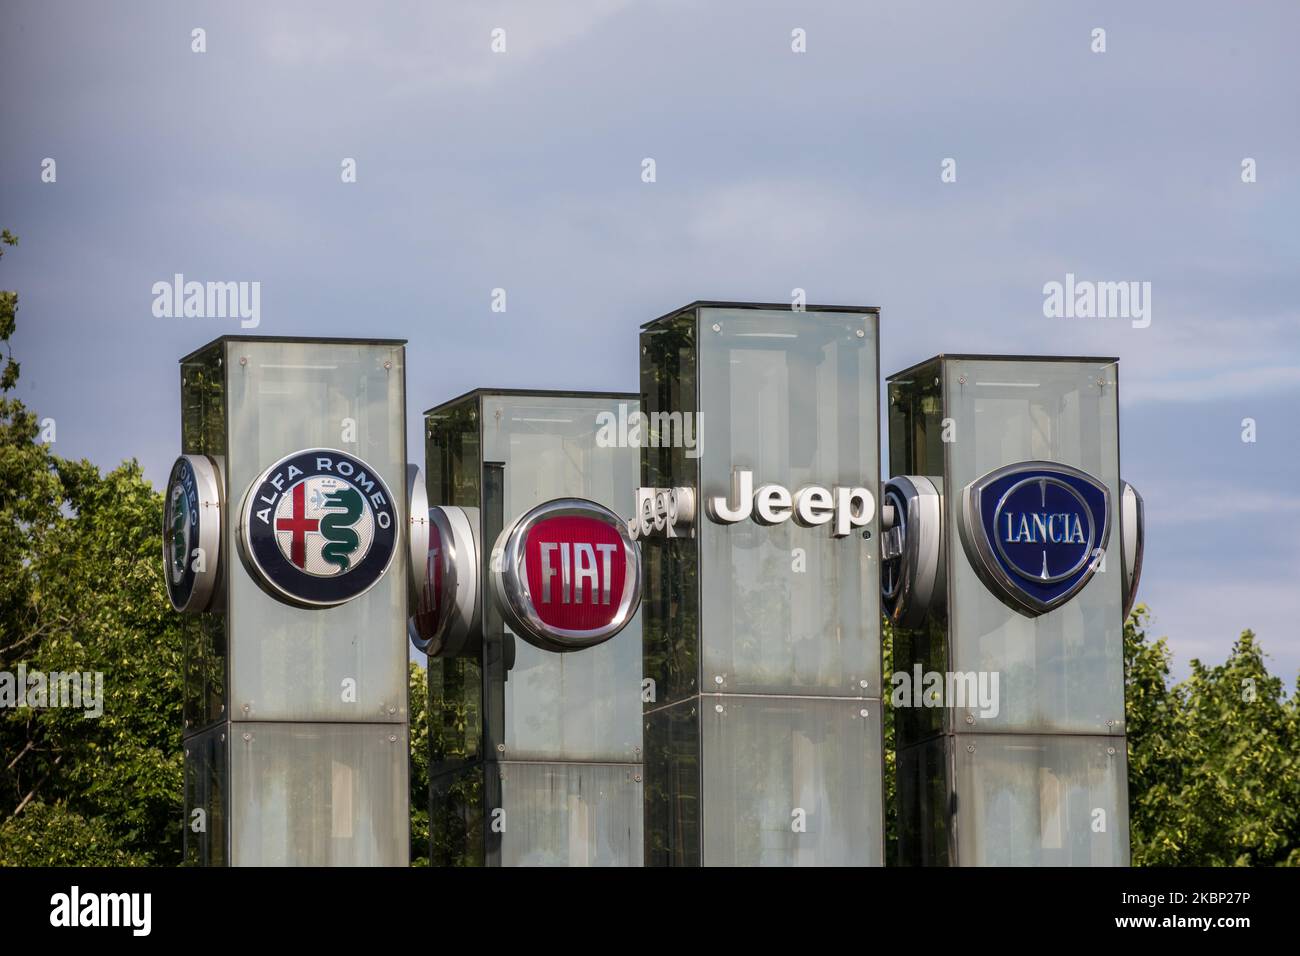 The logos of automobile companies (L-R) Alfa Romeo, Fiat, Jeep, Lancia are pictured at the entrance to the Fiat Chrysler Automobiles (FCA) at the Fiat Mirafiori car plant on in Turin, Italy on 19th May 2020. FCA's Italian loan request as part of more than 400 billion euros Italy is making available to businesses hit by the pandemic, raises criticism within the ruling Italian coalition. The reason is a possible payment of a large dividend to FCA's investors at a time when the coronavirus crisis has left cash-starved manufacturers. (Photo by Mauro Ujetto/NurPhoto) Stock Photo